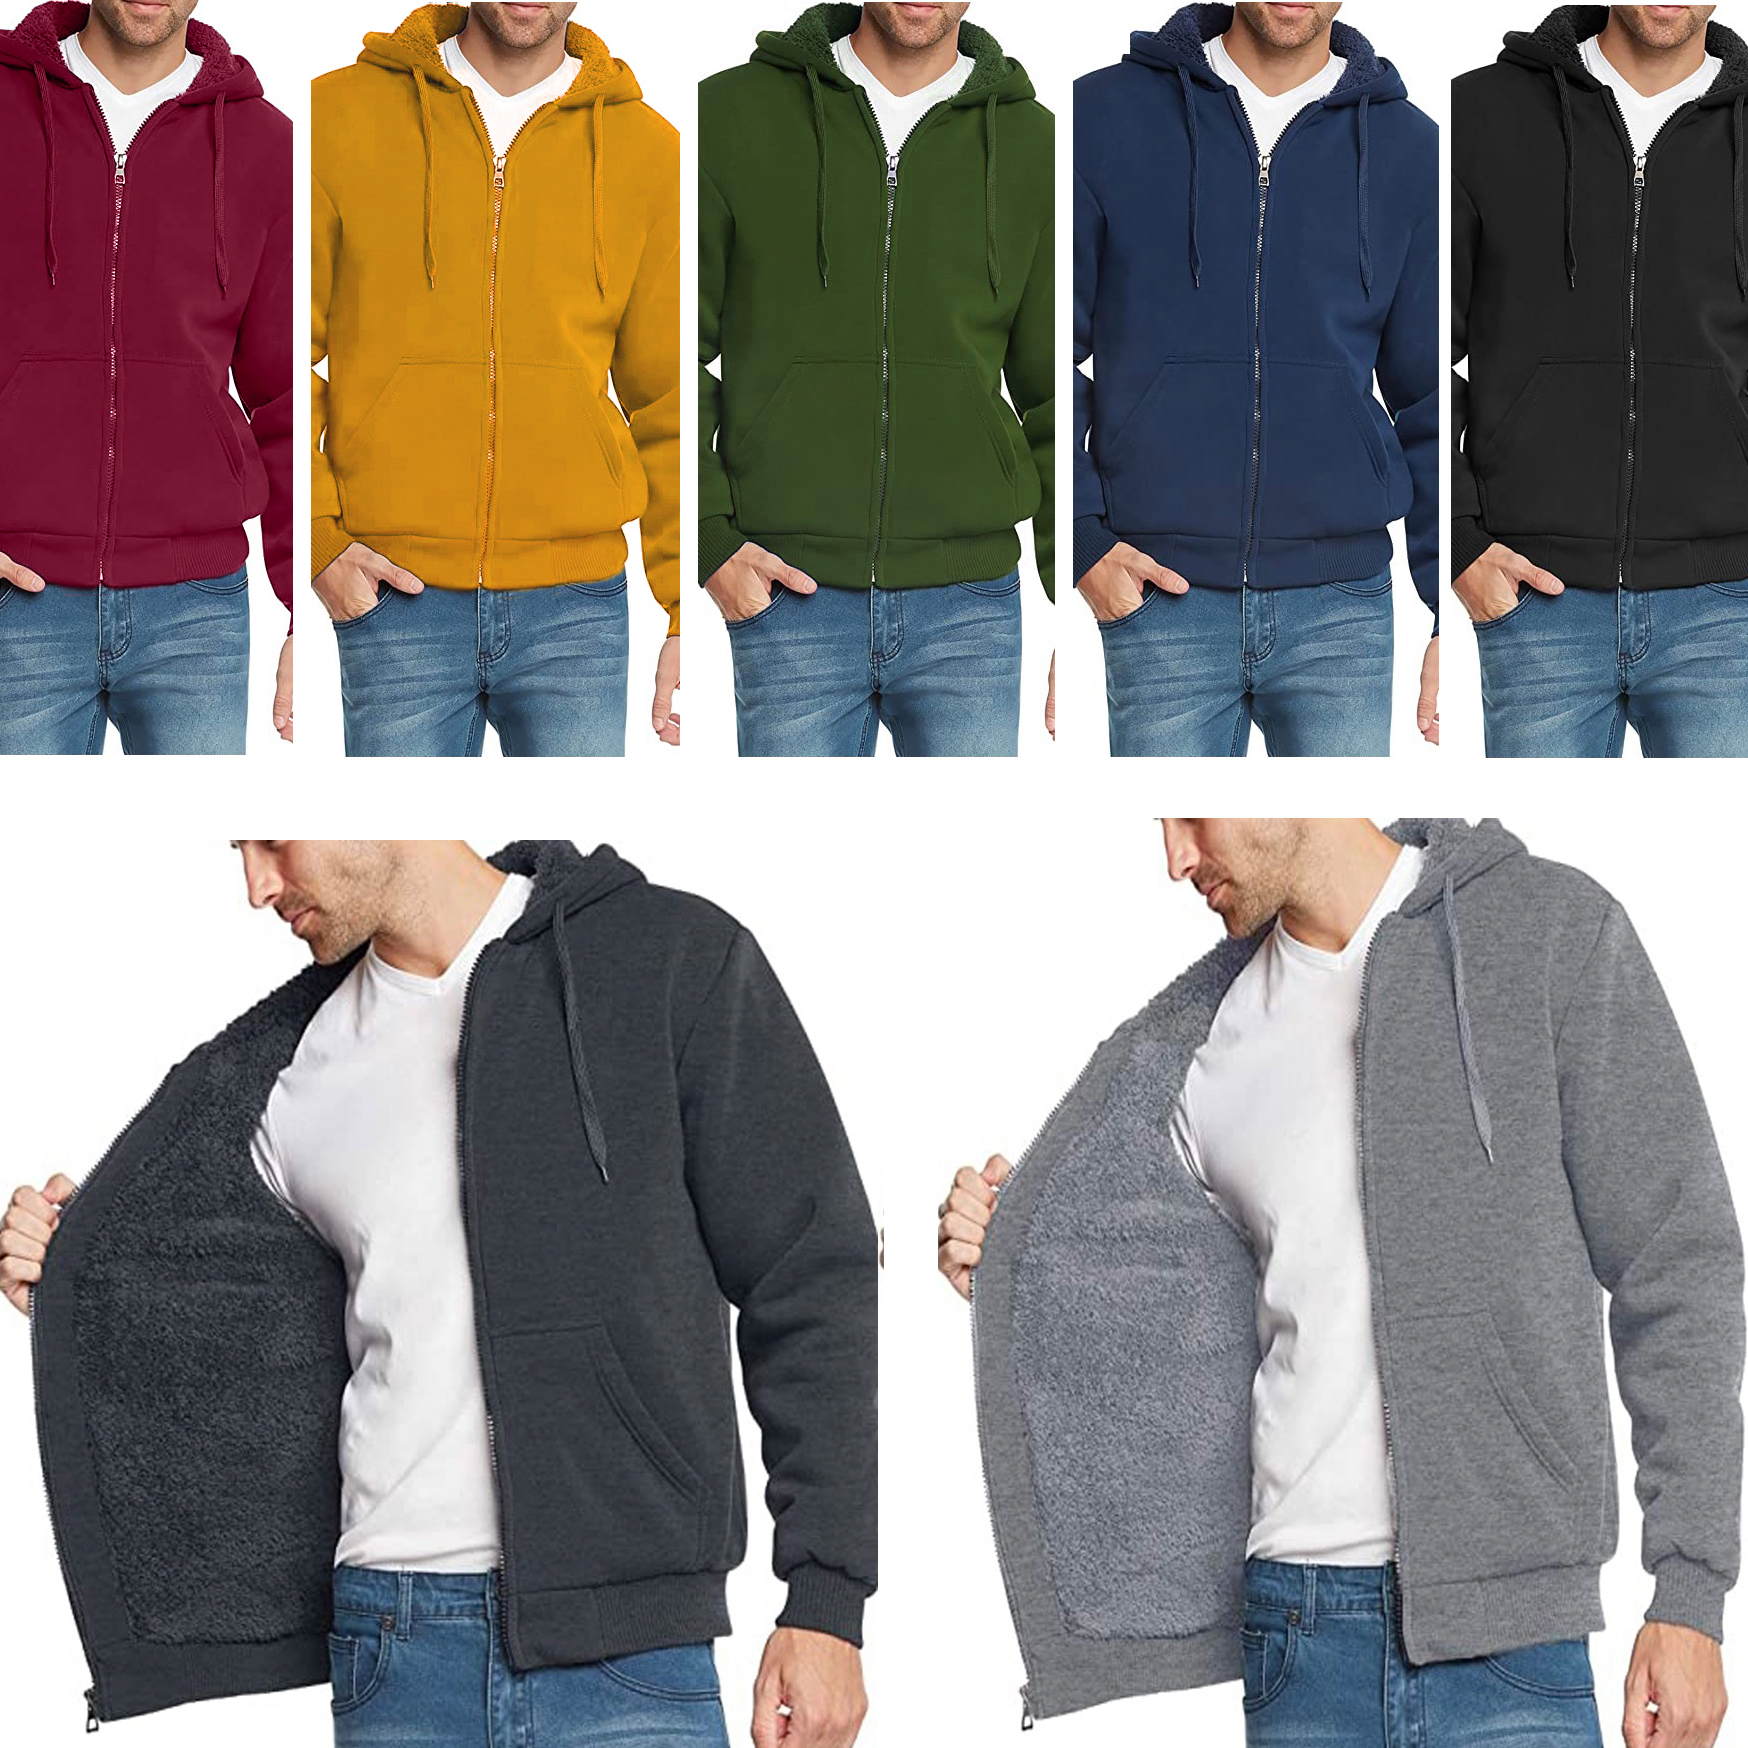 Men's Extra-Thick Sherpa Lined Fleece Hoodie (Big & Tall Sizes Available) - Charcoal, Large